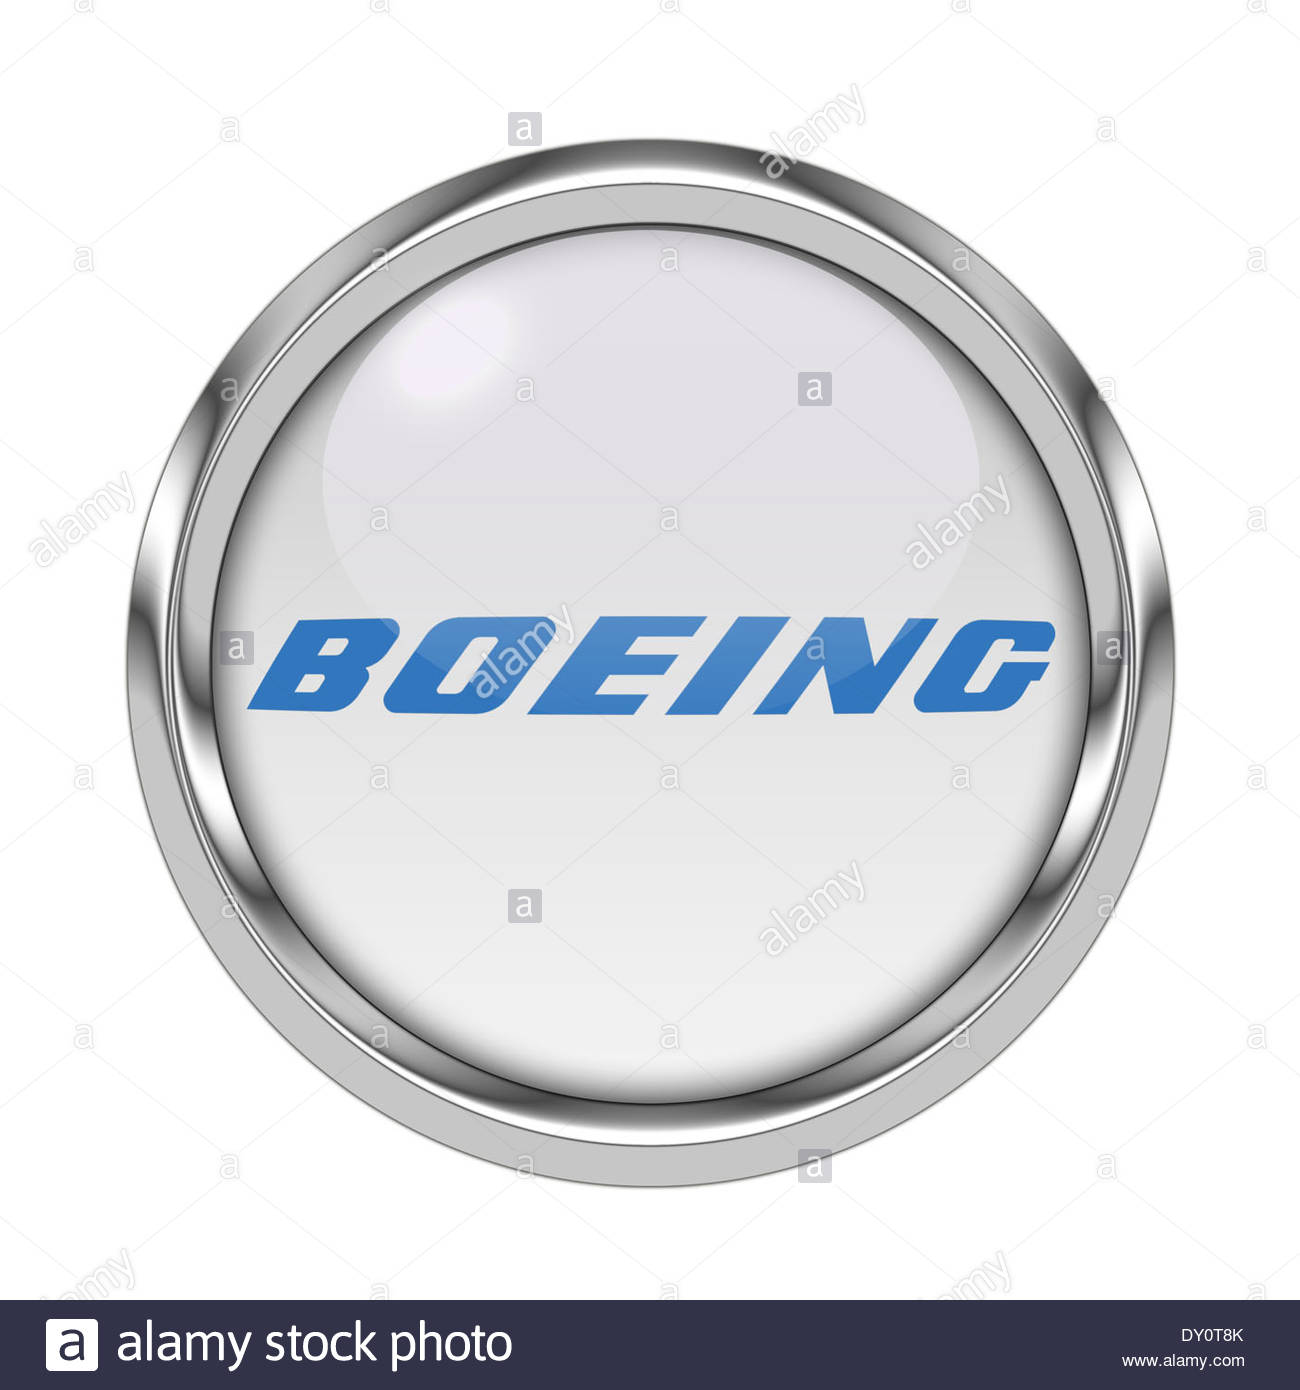 Boeing icons | Noun Project